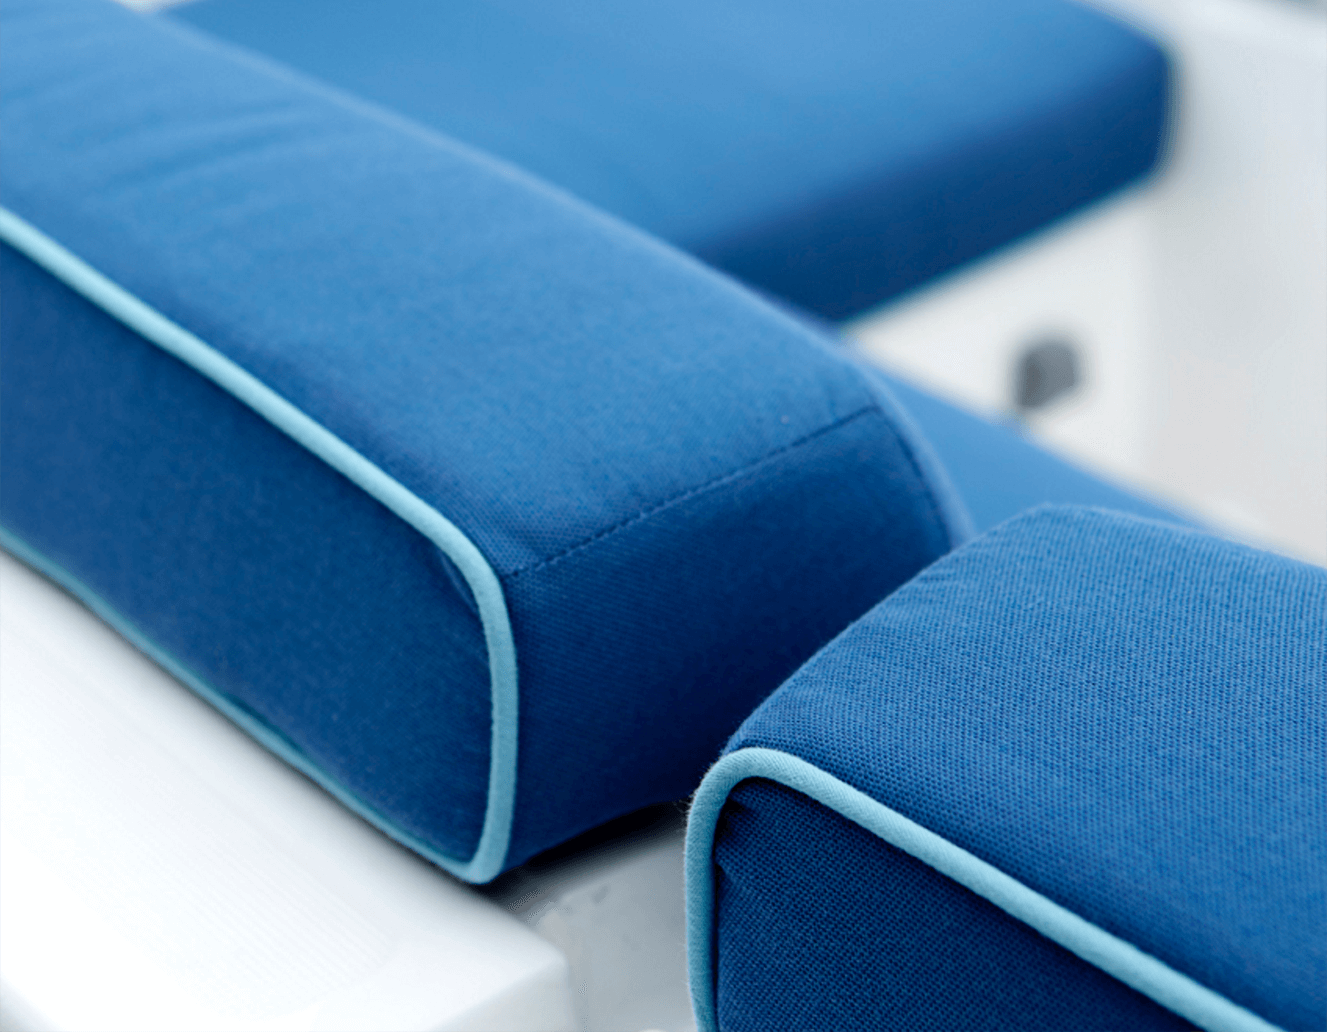 Detail of blue cushions with light blue piping on boat seat cushions